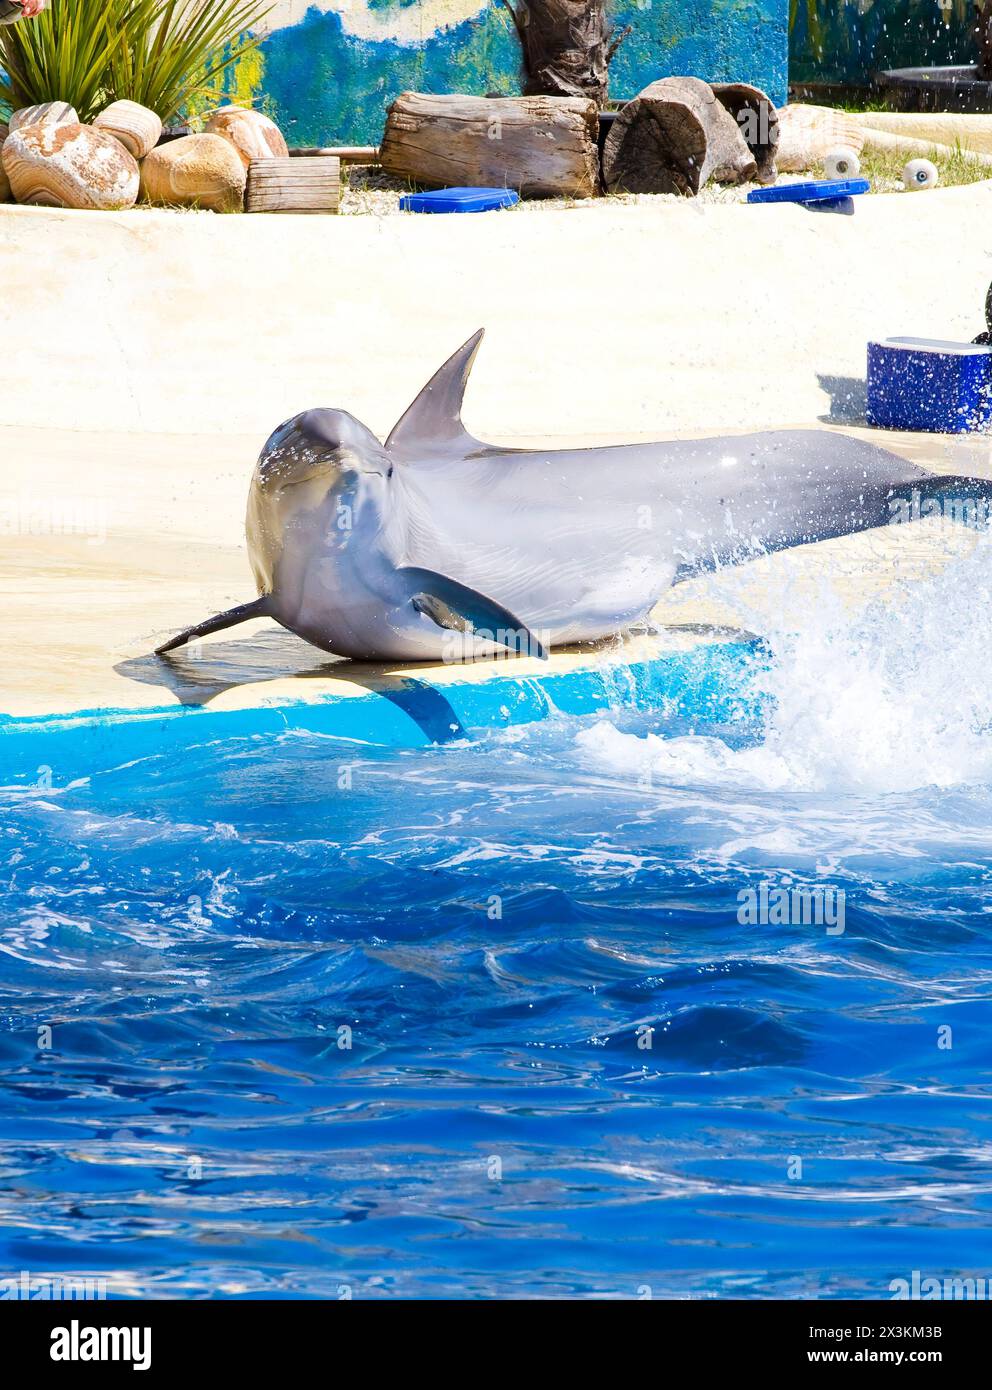 Oceanic Elegance: Majestic Dolphin Leaping from the Sea Stock Photo